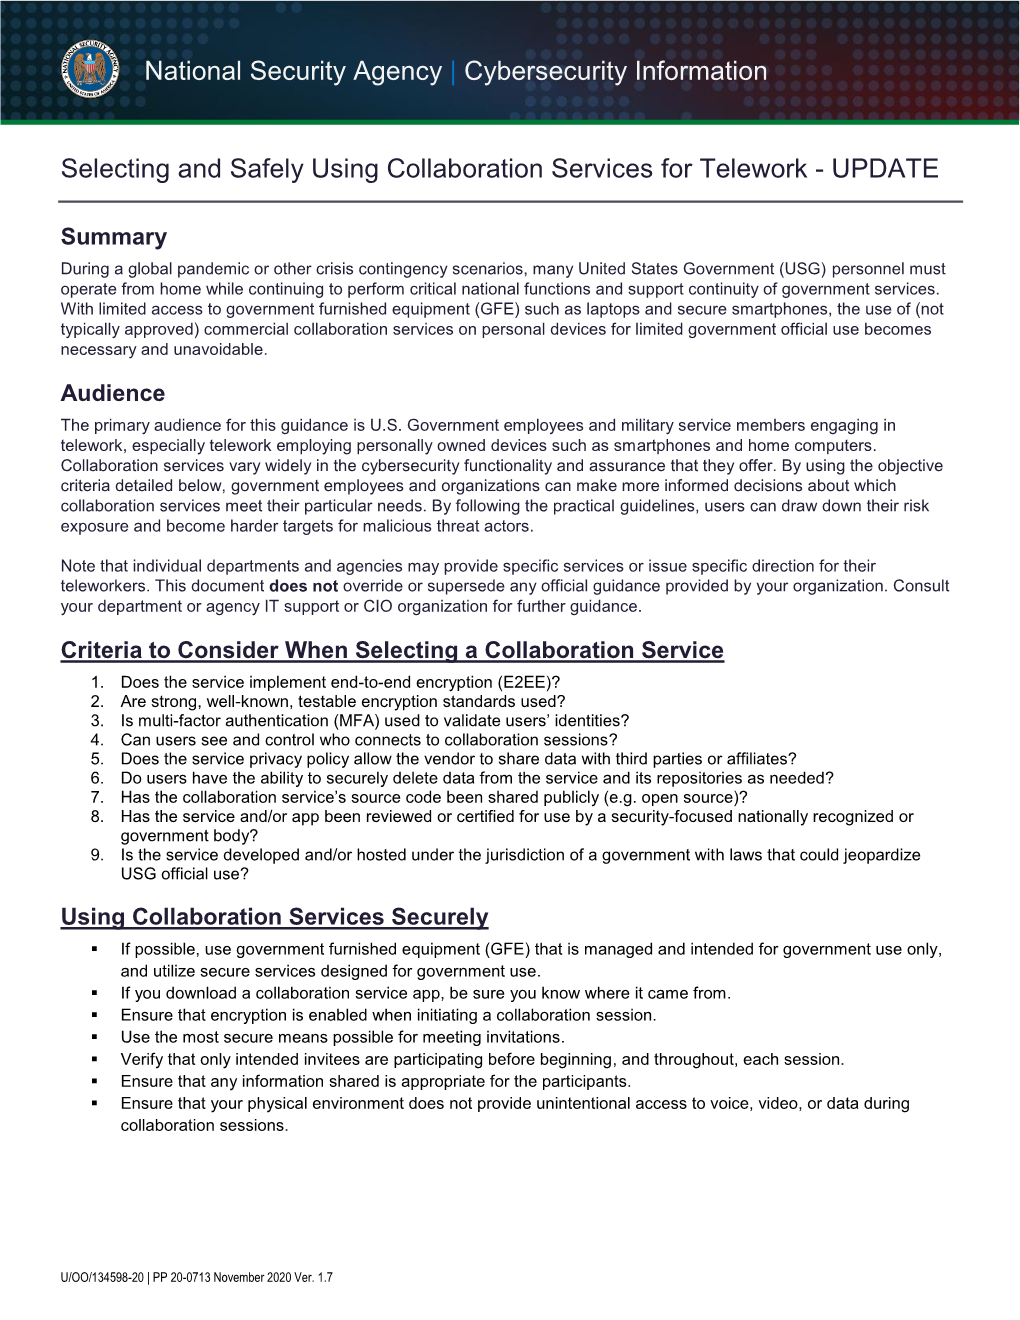 Selecting and Safely Using Collaboration Services for Telework - UPDATE